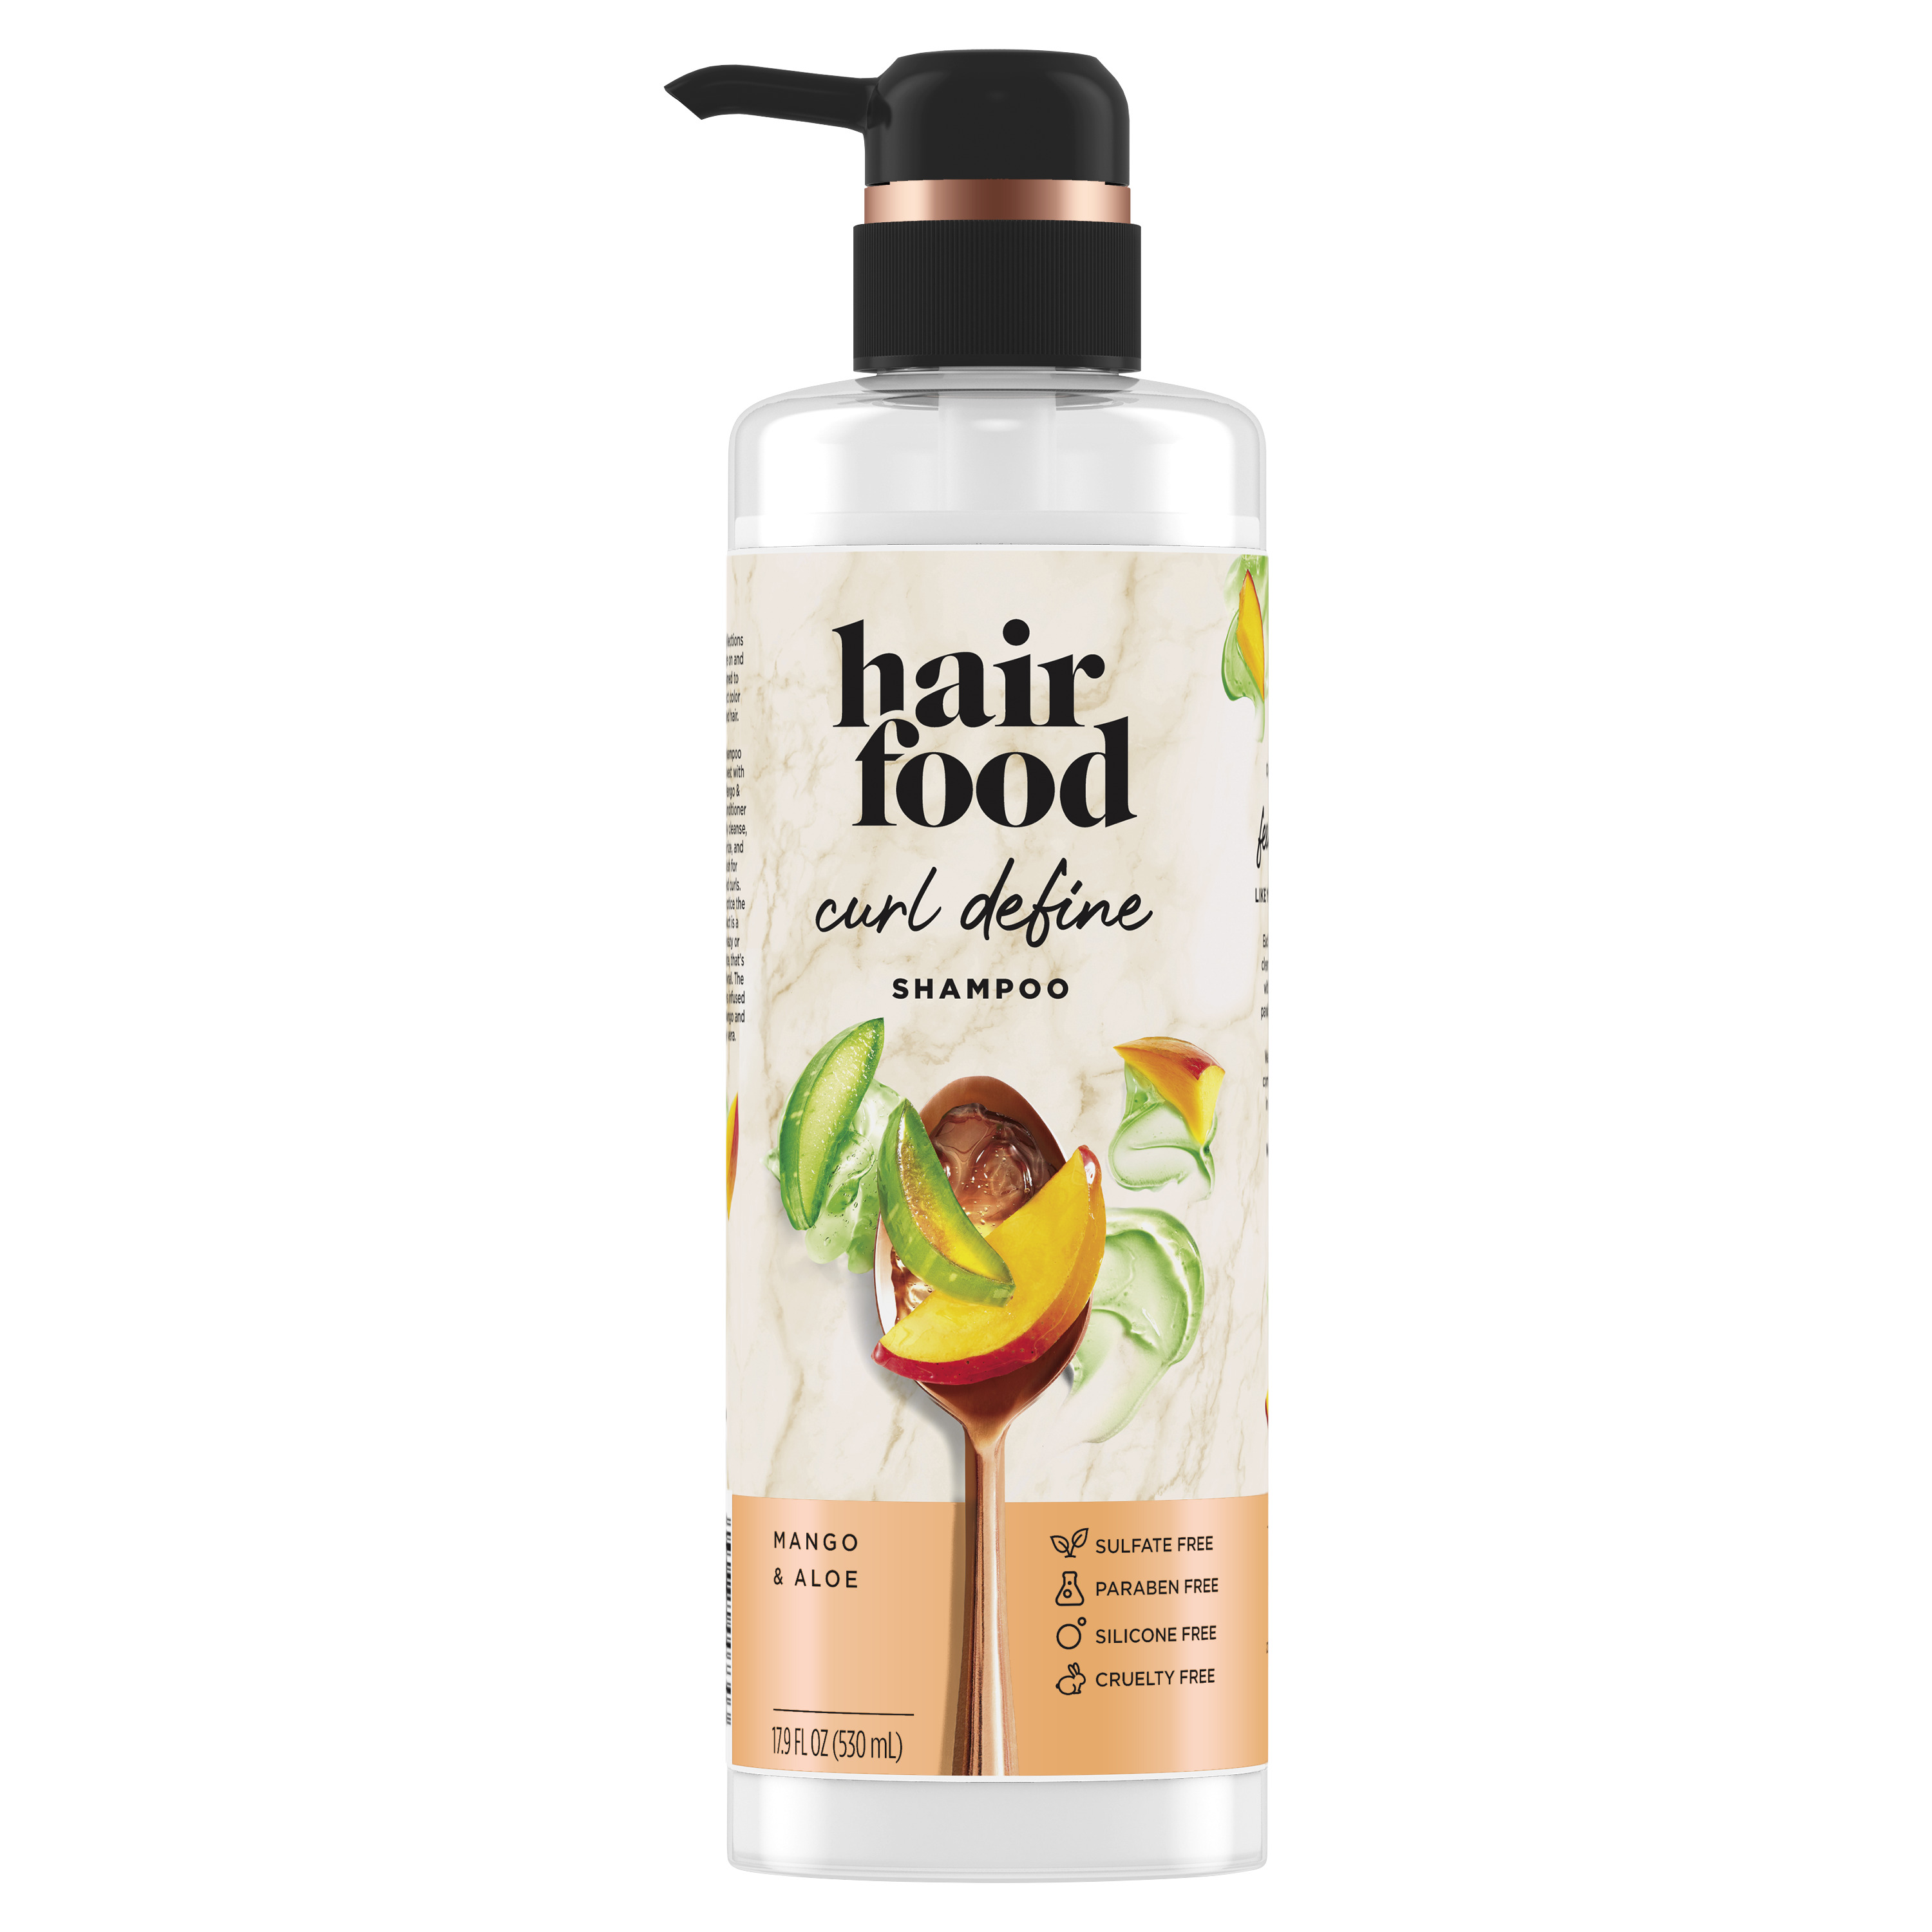 Sulfate Free Shampoos  Paraben  Cruelty Free  Hair Food